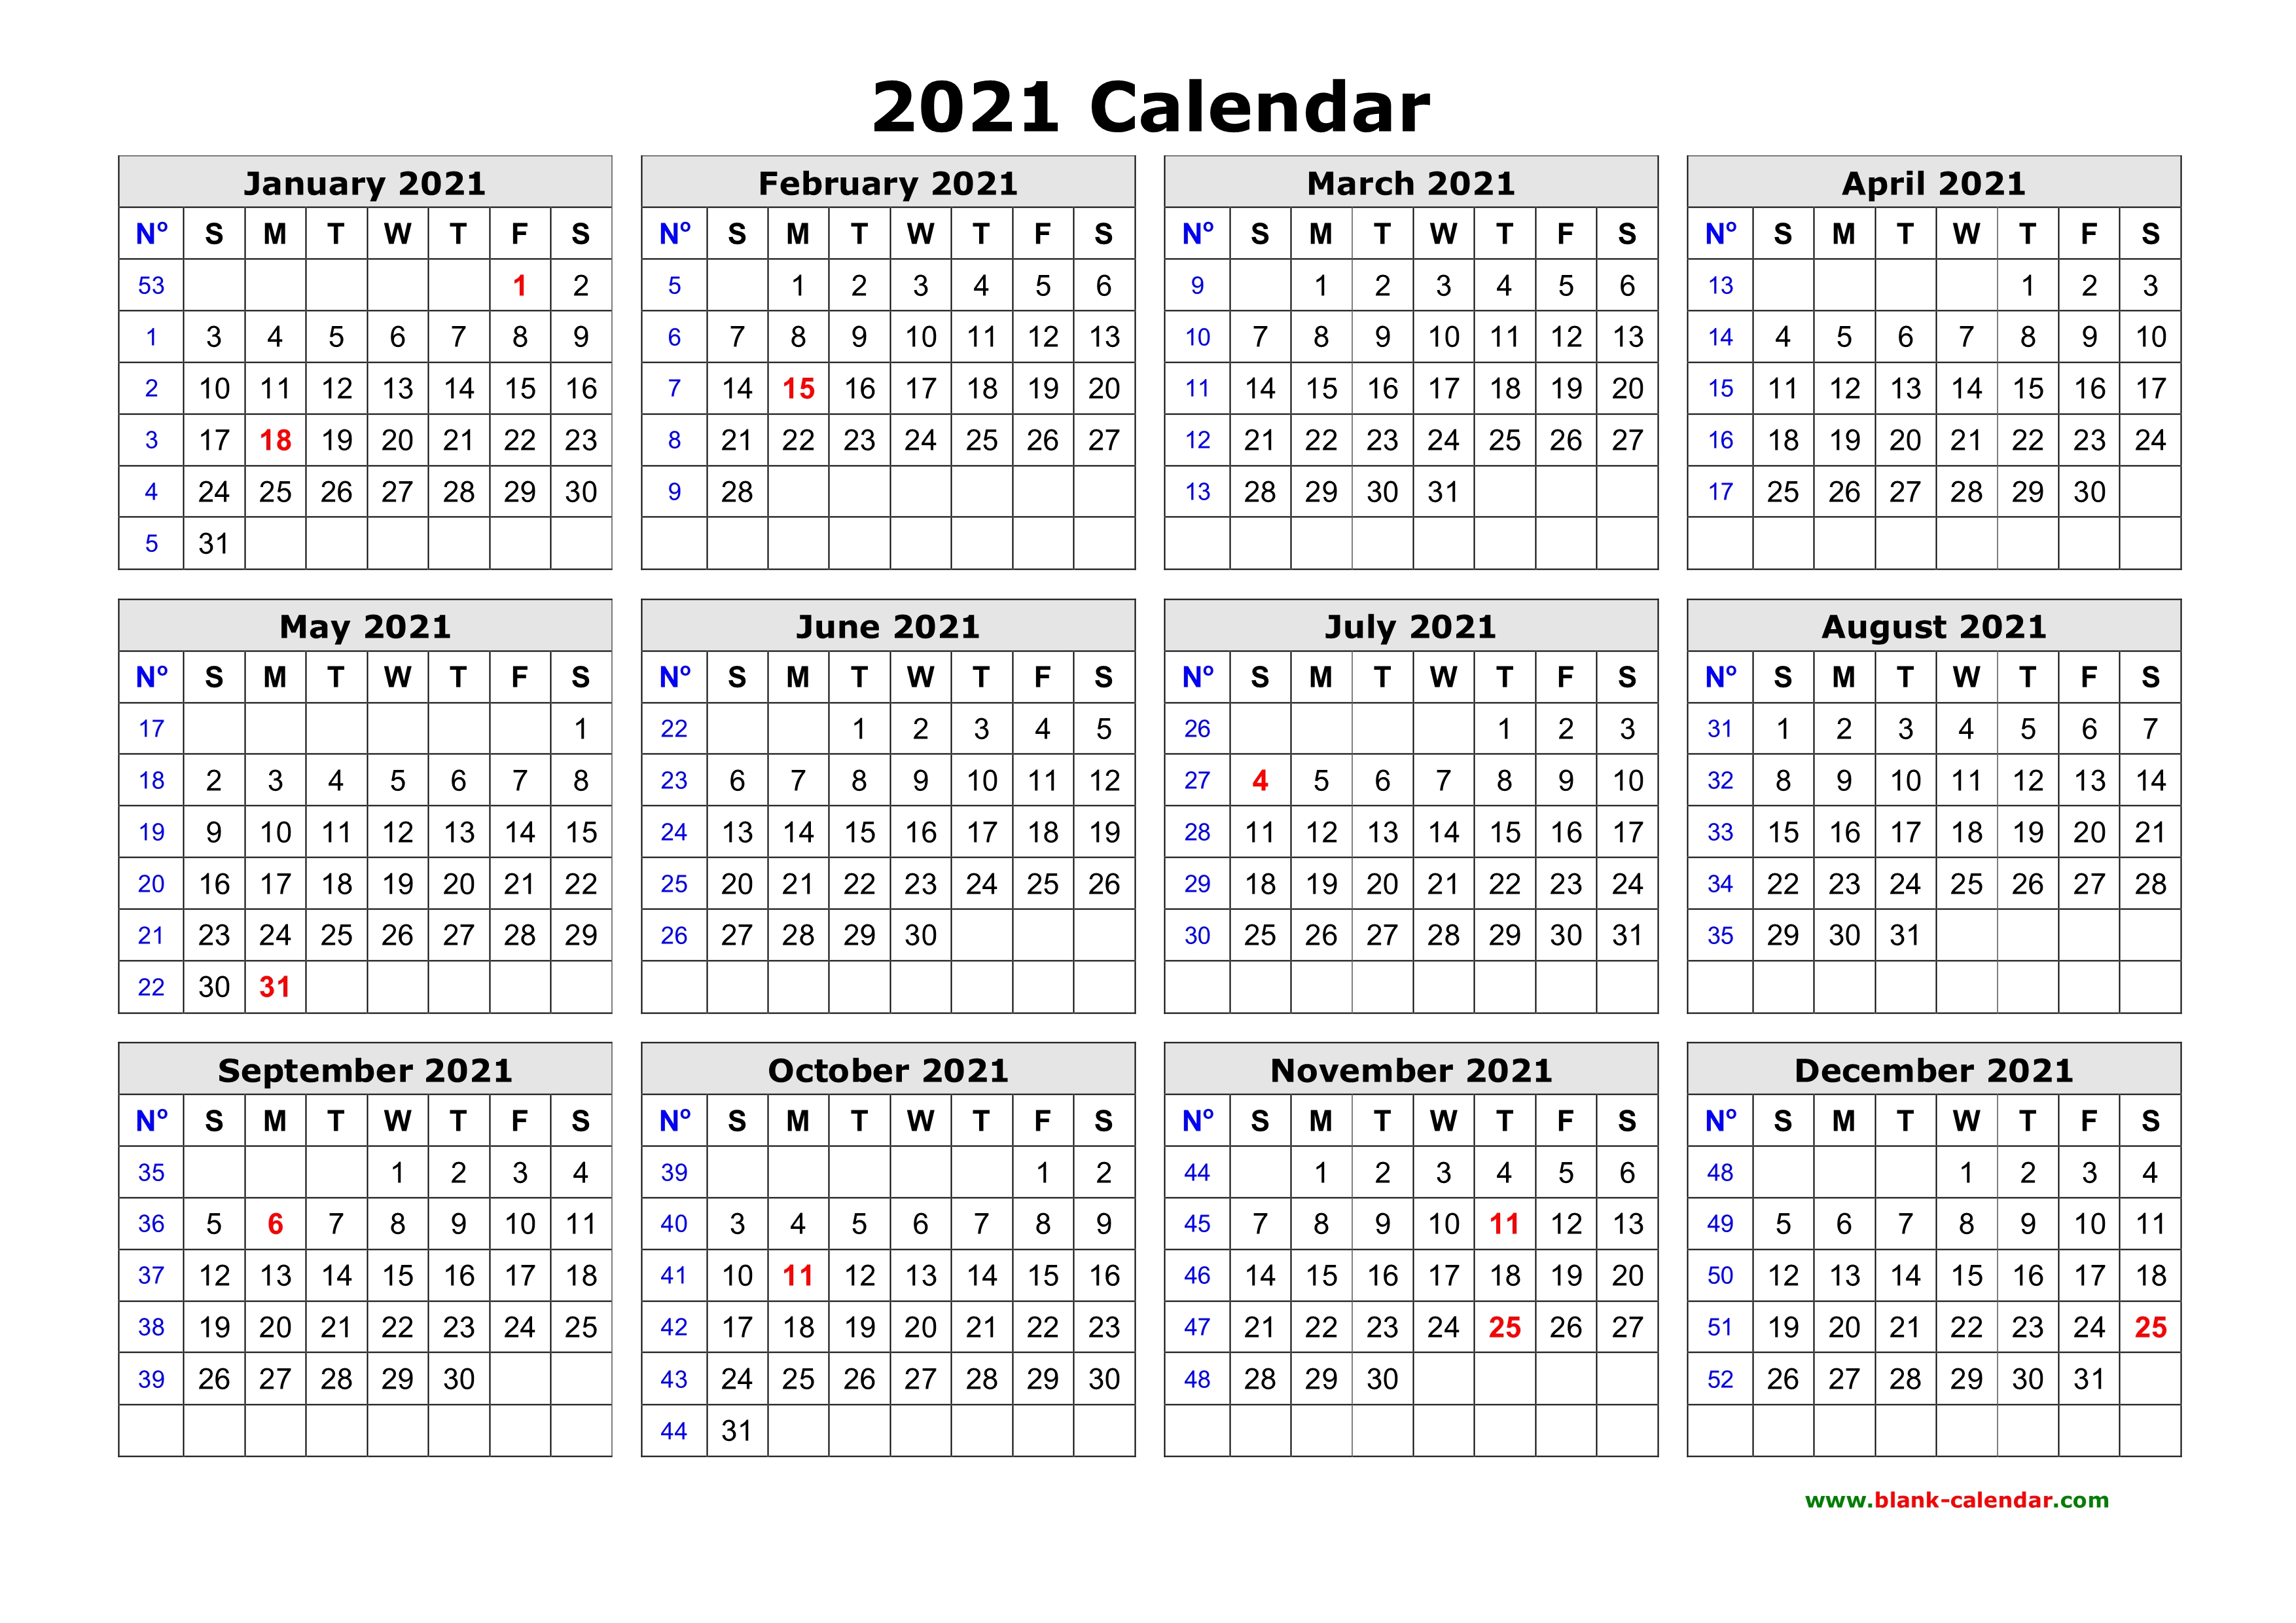 One Page Calendar 2021 Free Download Printable Calendar 2021 in one page, clean design.